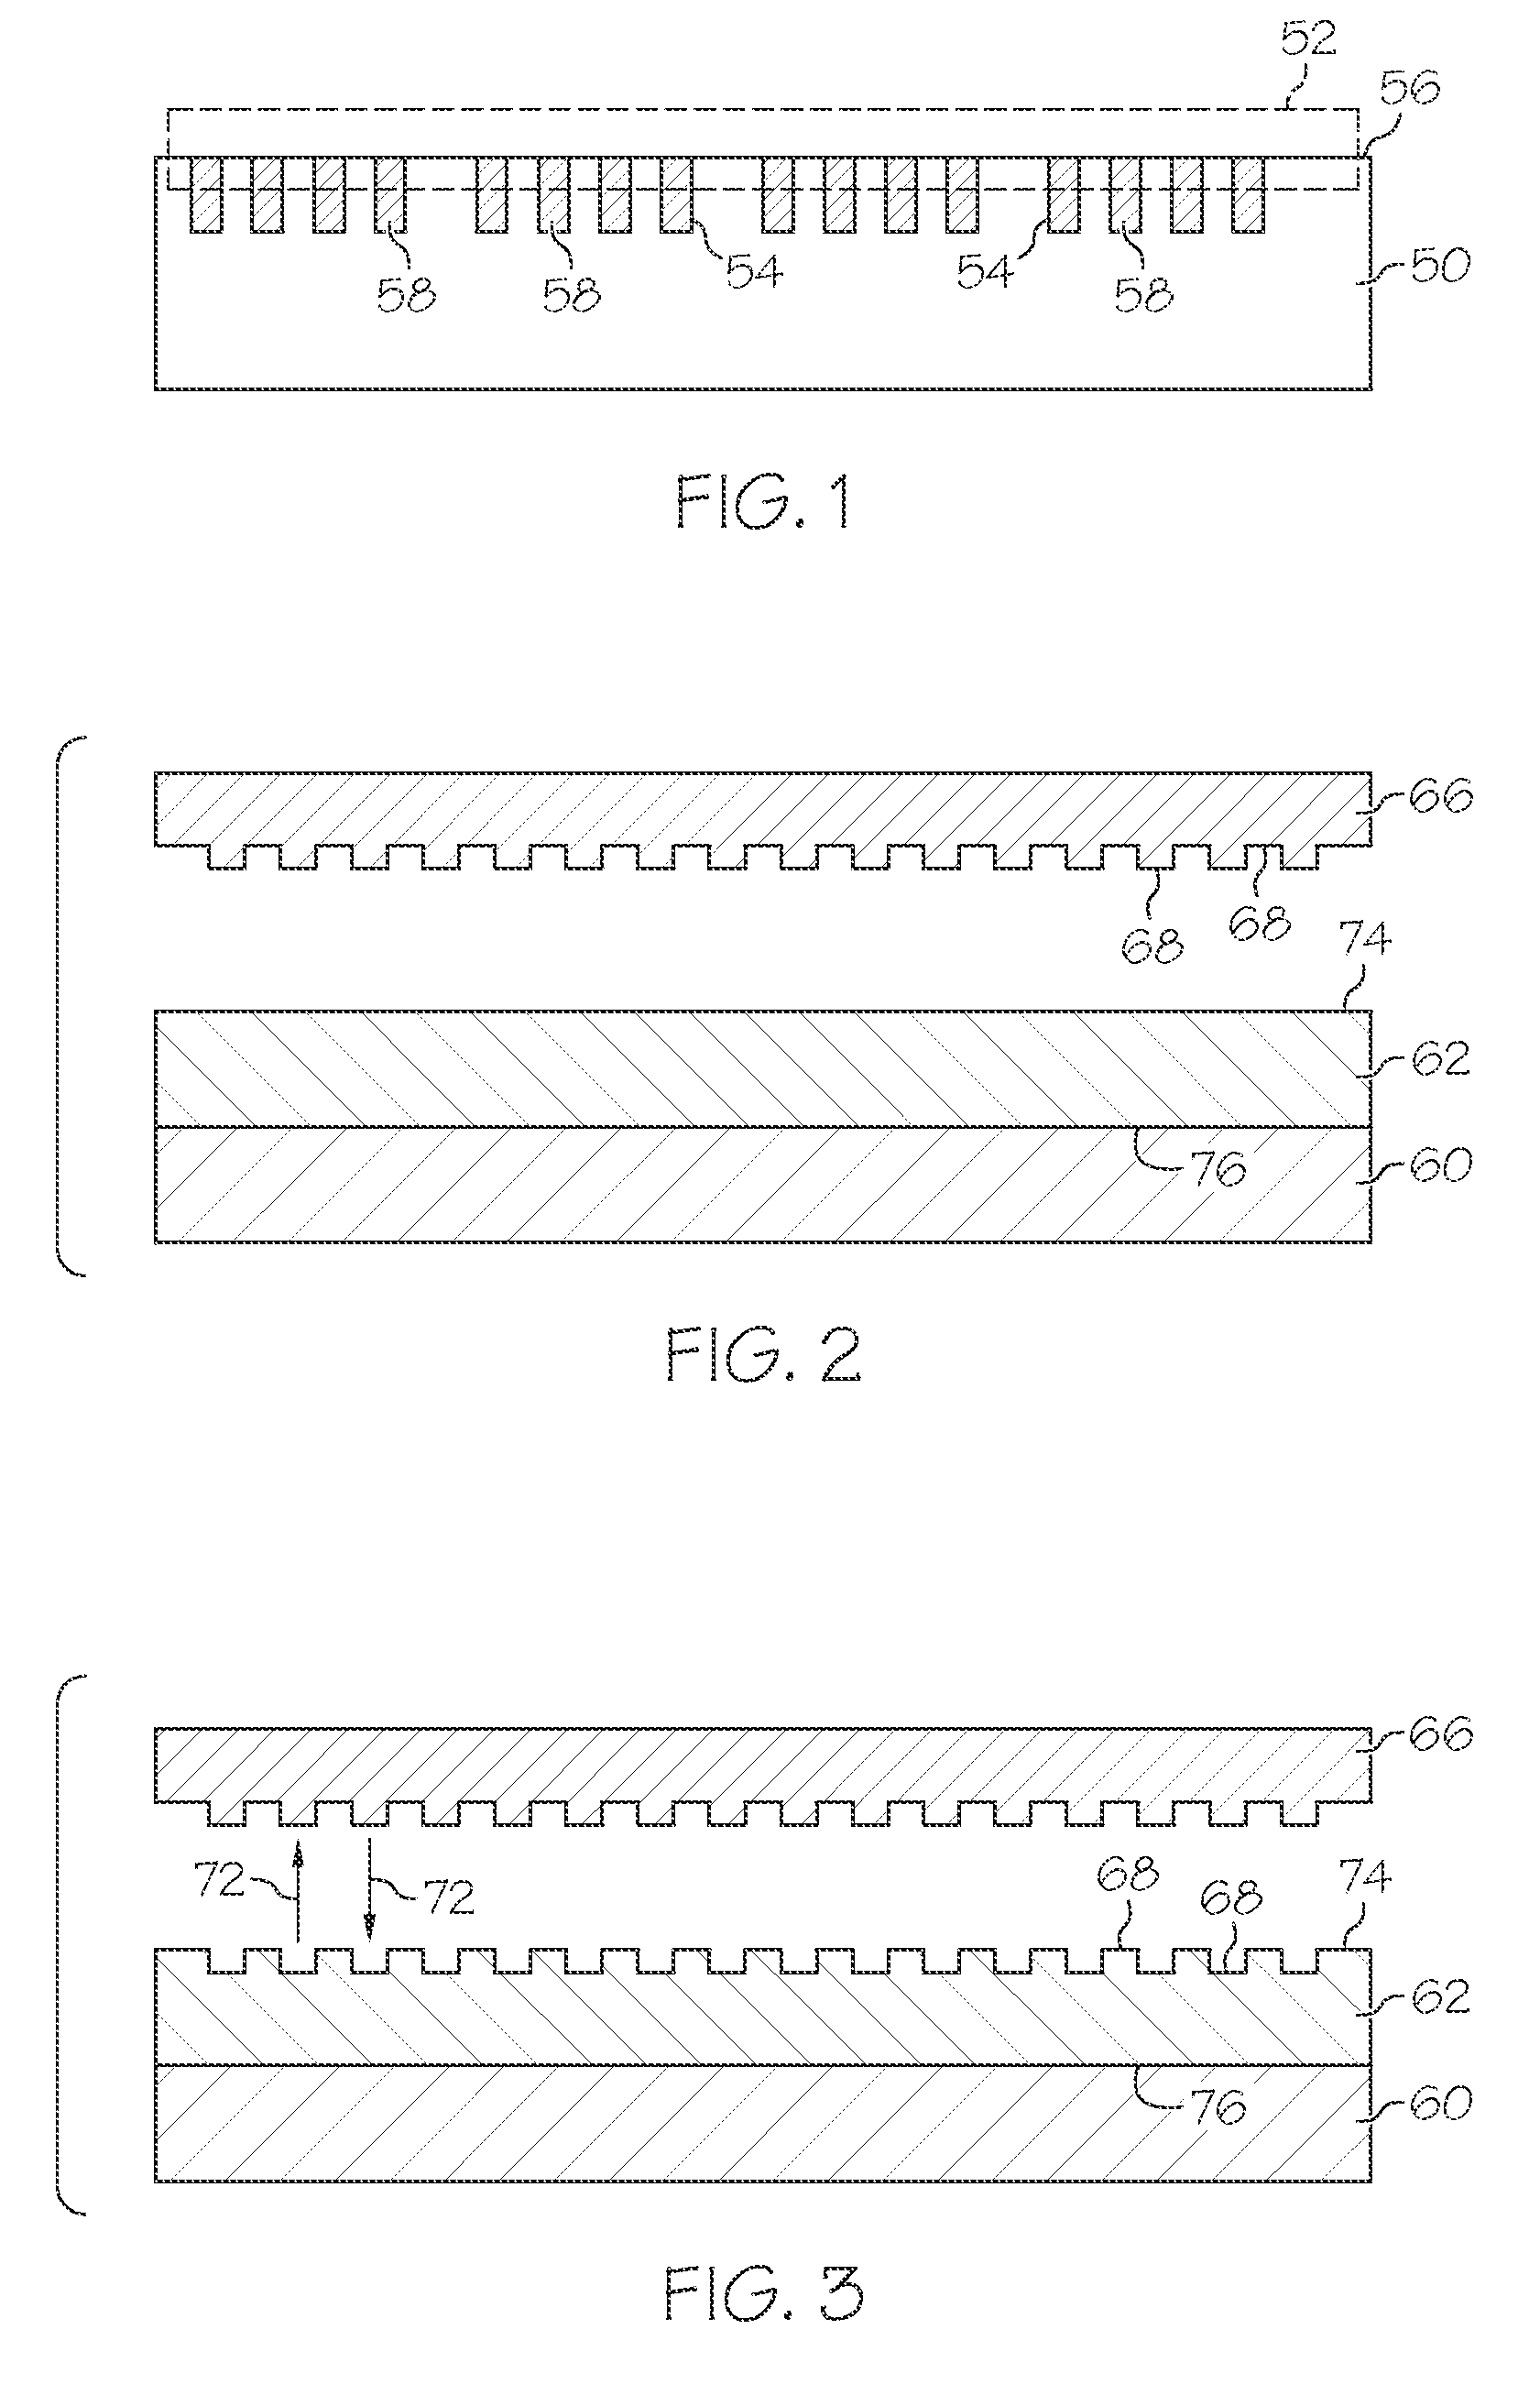 Method for fabricating through substrate vias in semiconductor substrate